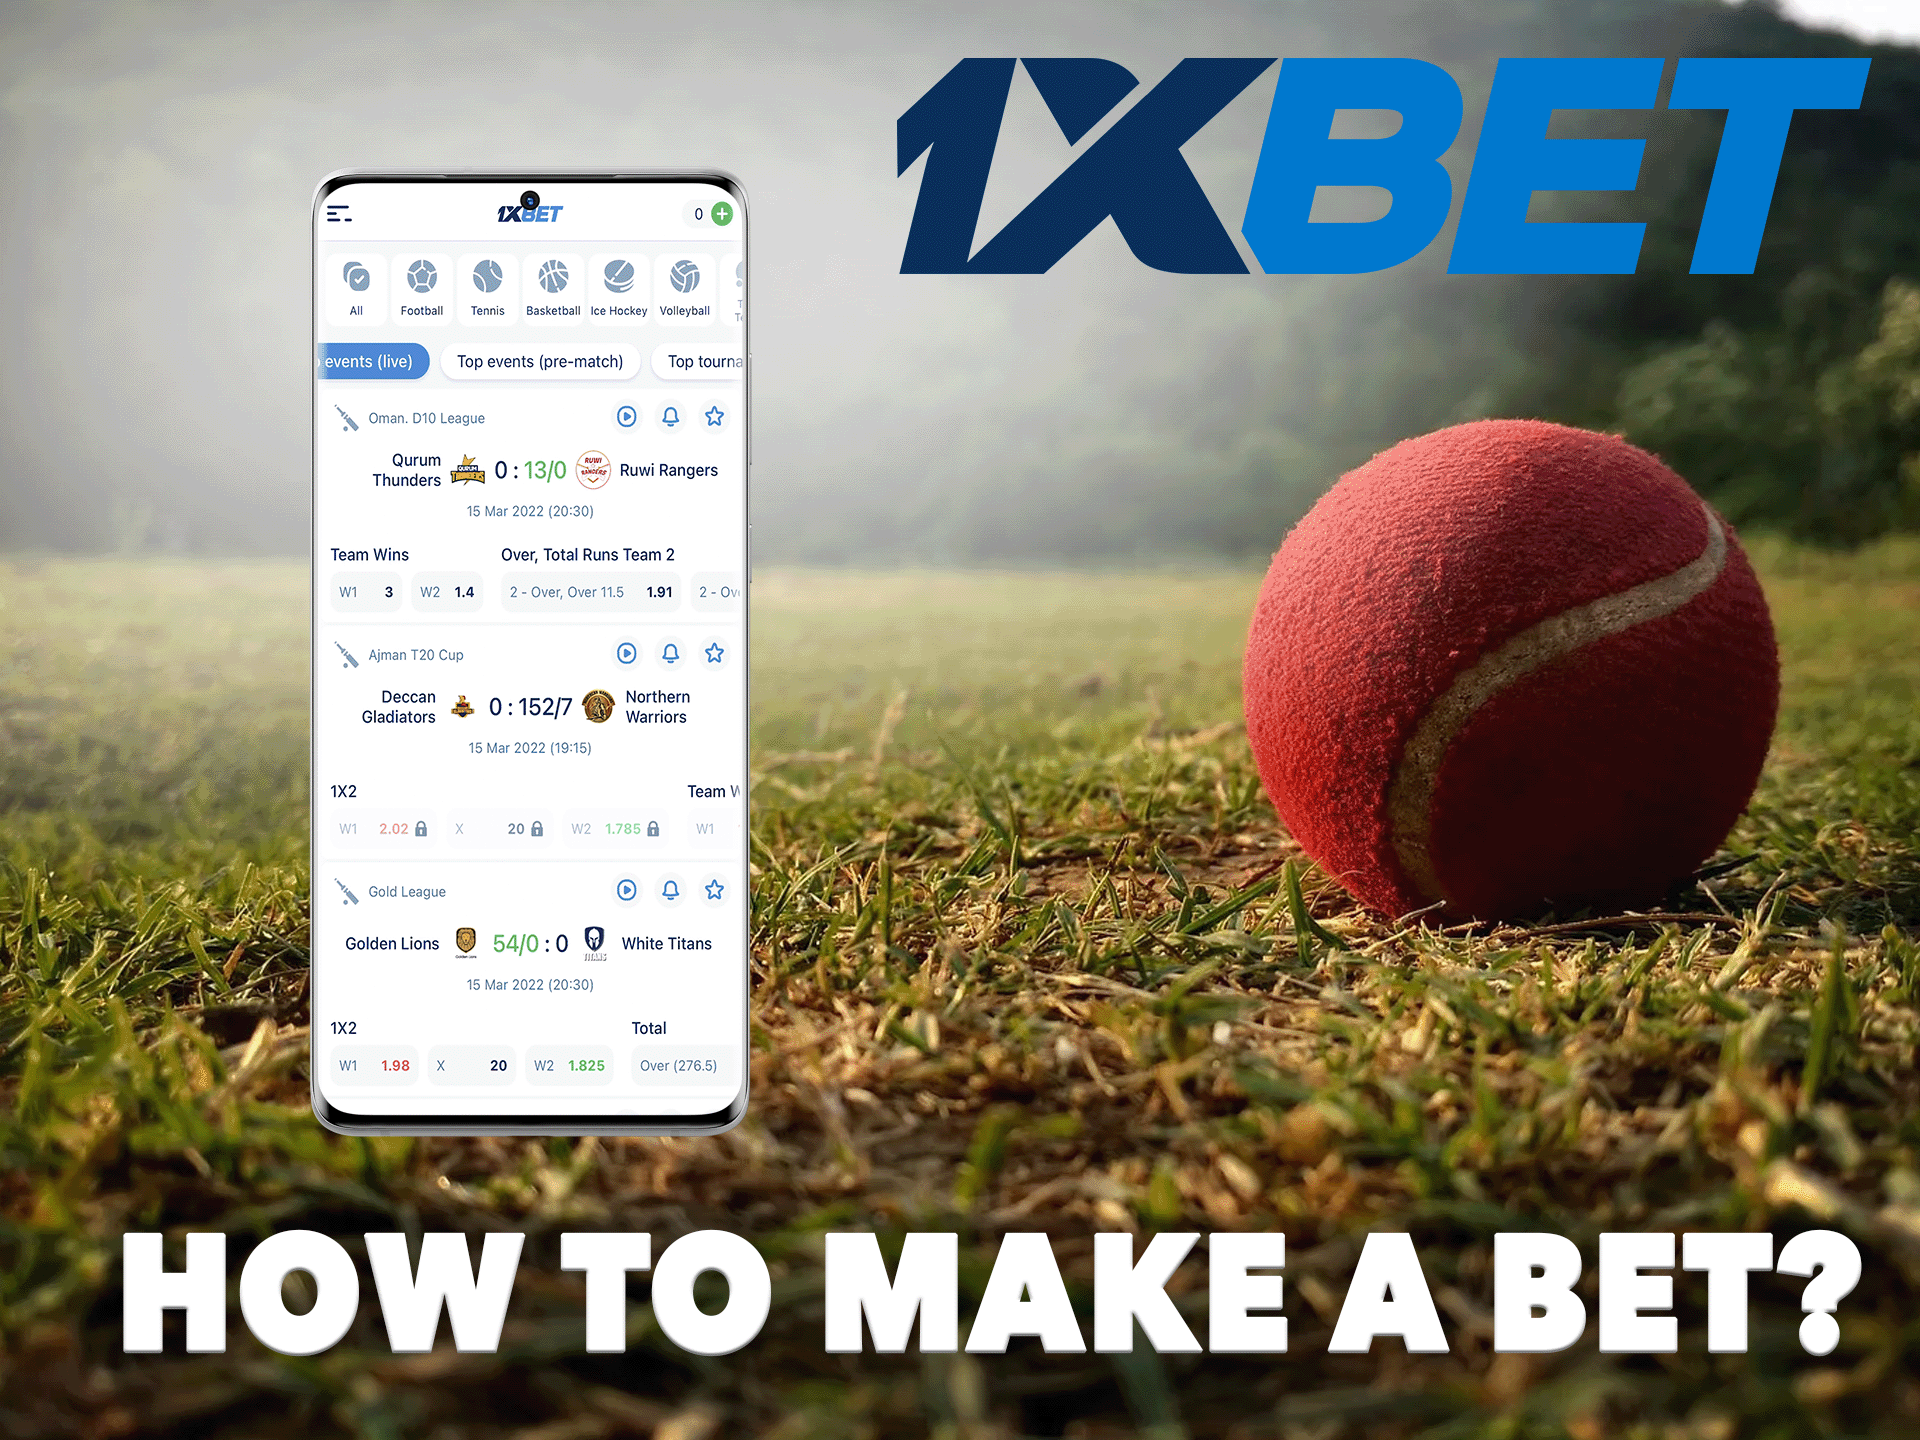 Instructions on how to make a bet in app 1xbet.